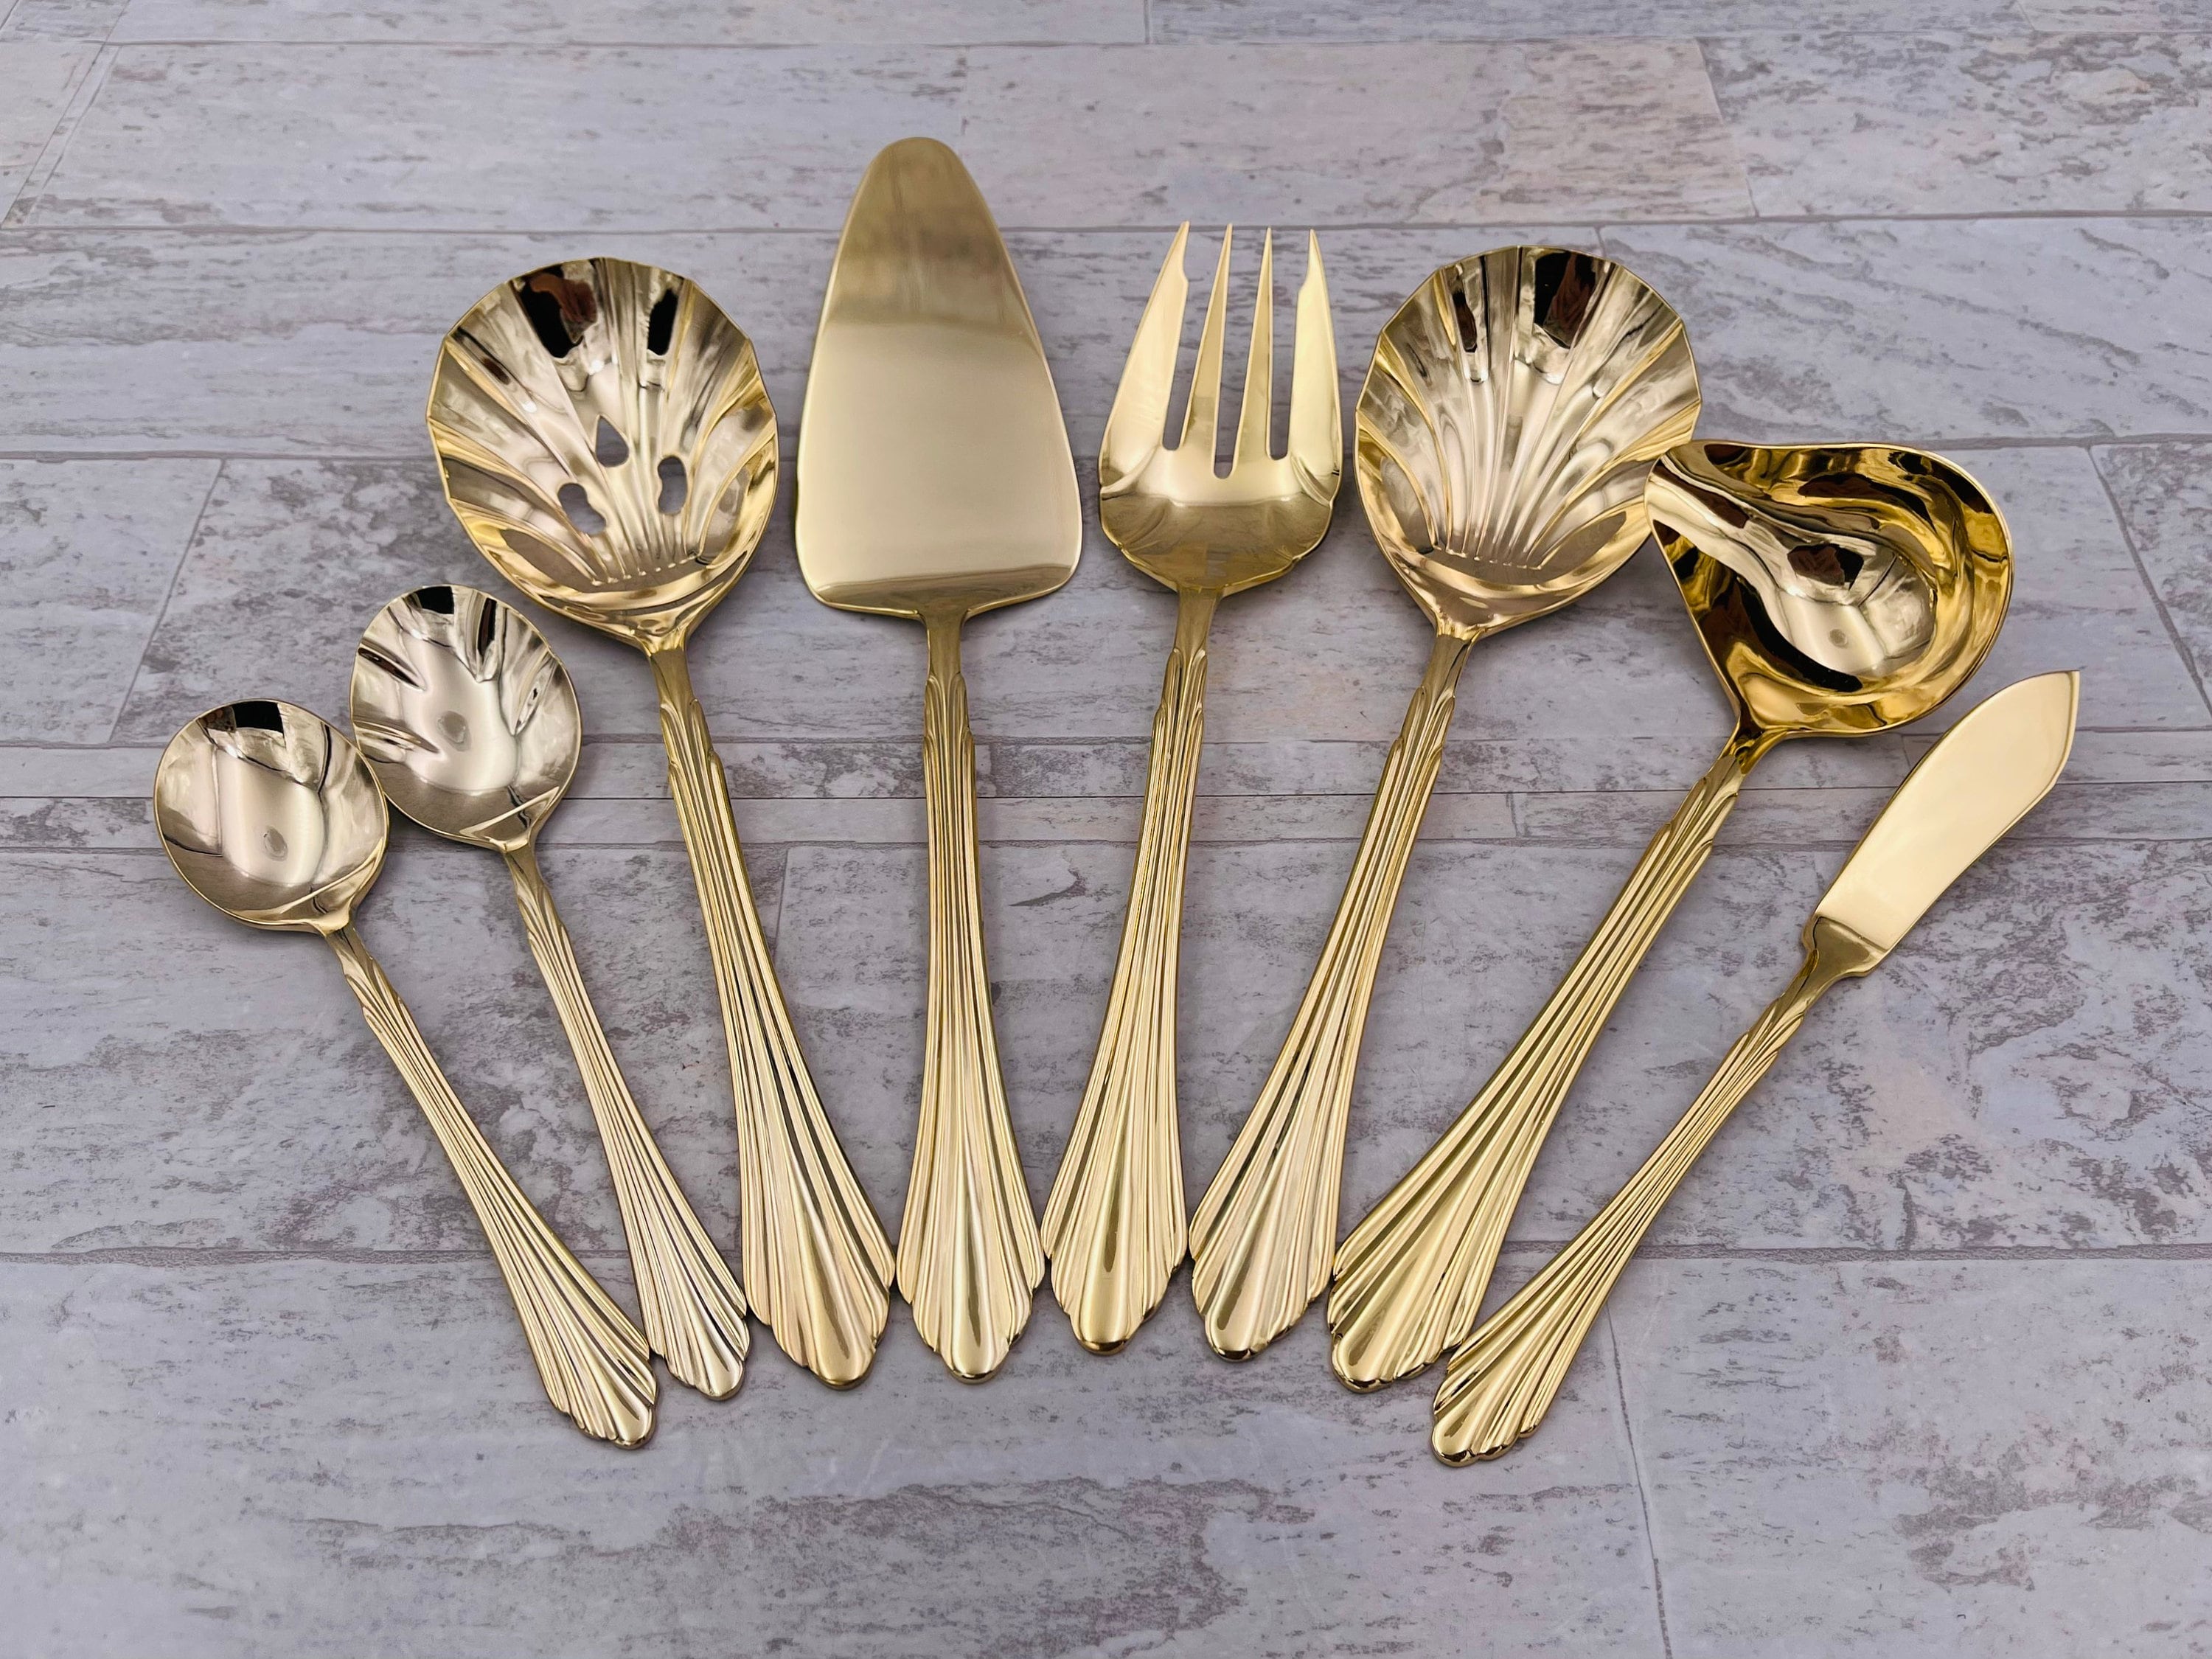 Vintage Farberware Gold Plated Flatware Service for 12 - 64 Pieces